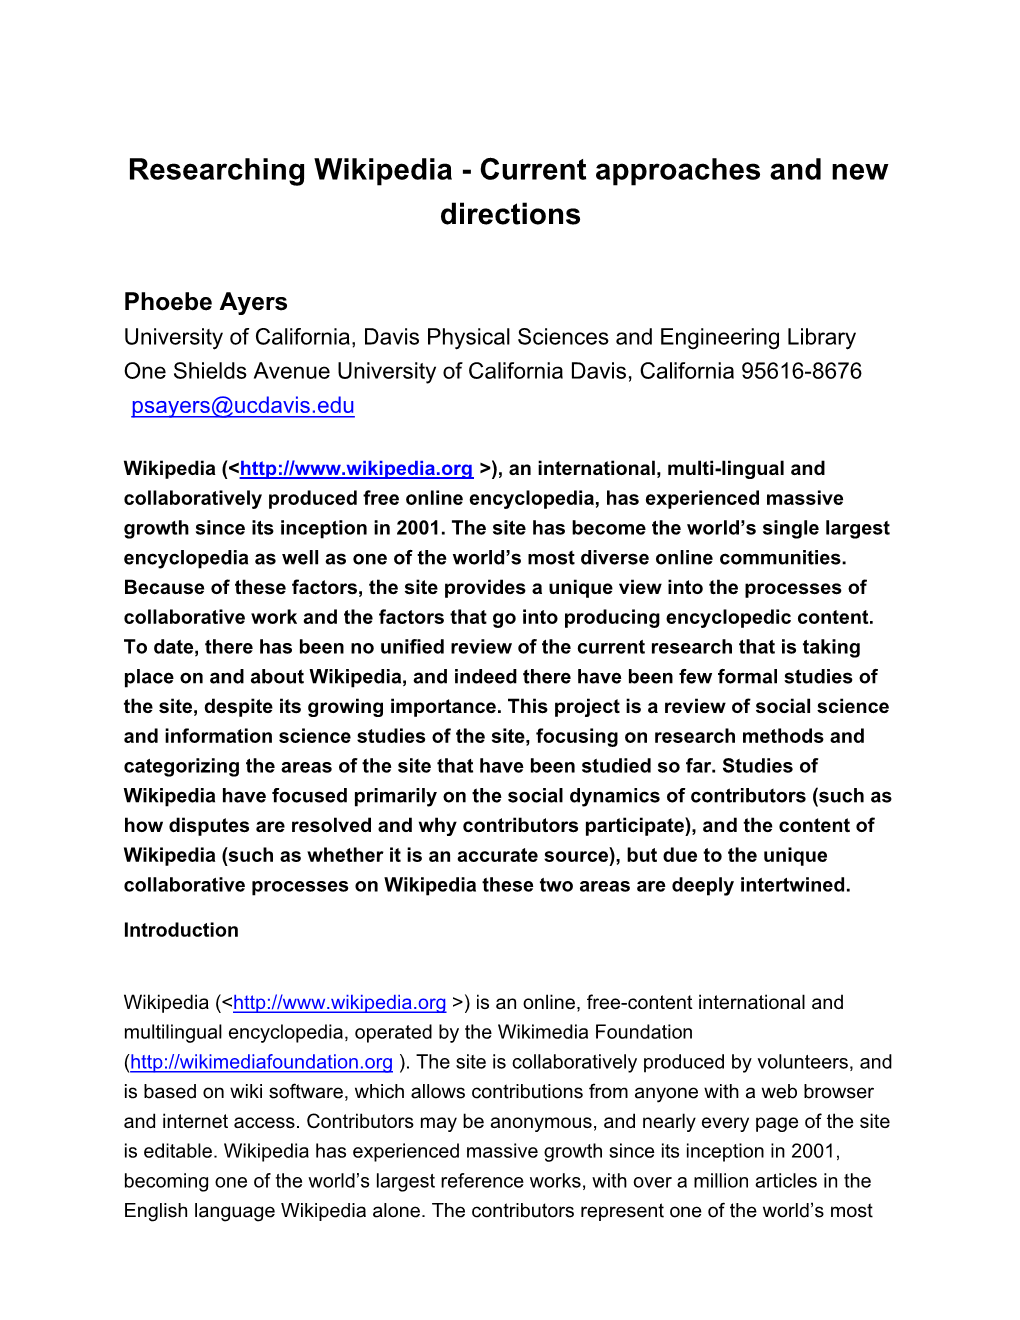 Researching Wikipedia - Current Approaches and New Directions